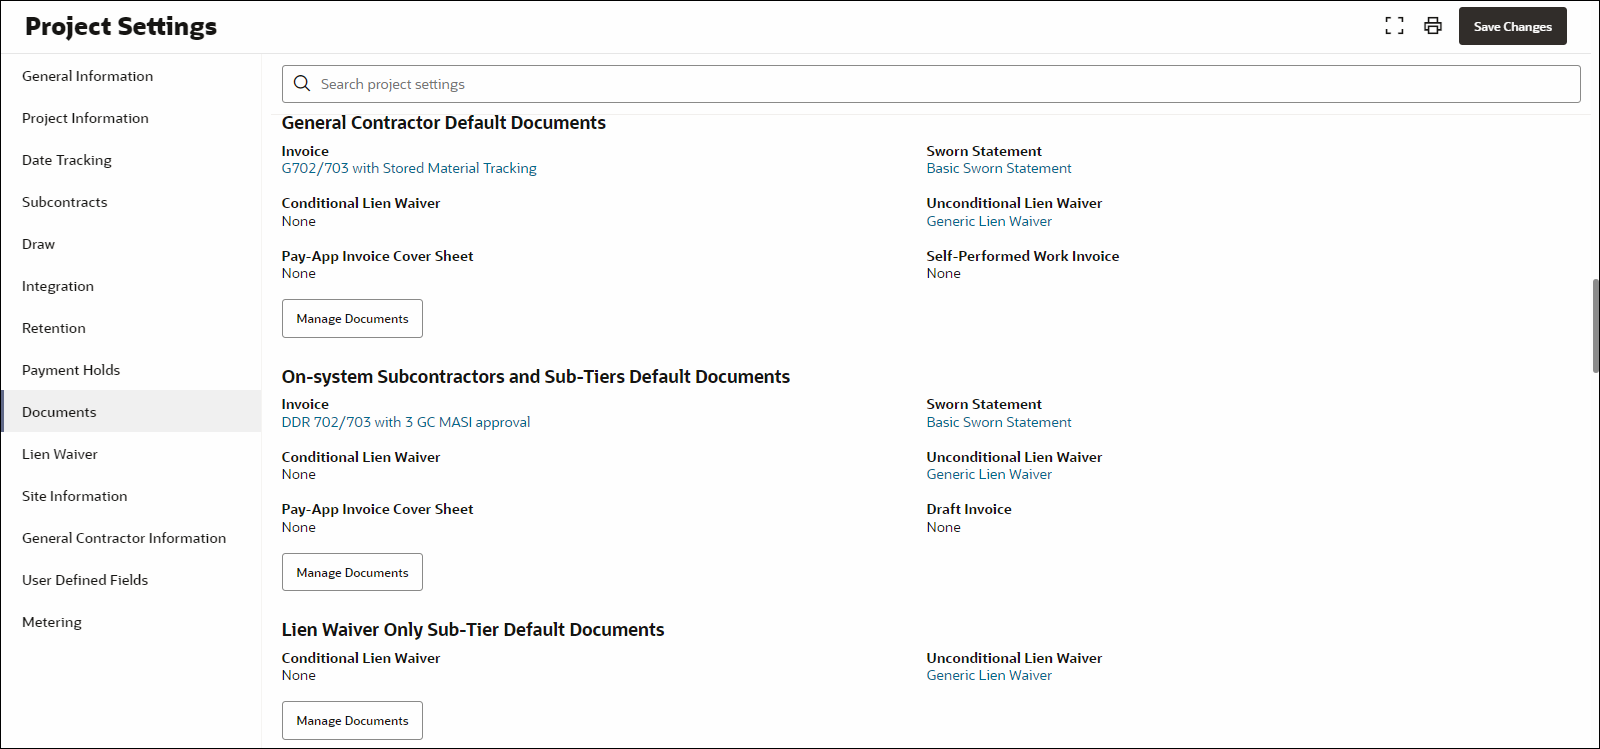 A screenshot of the Project Settings page, showing the documentation requirements.